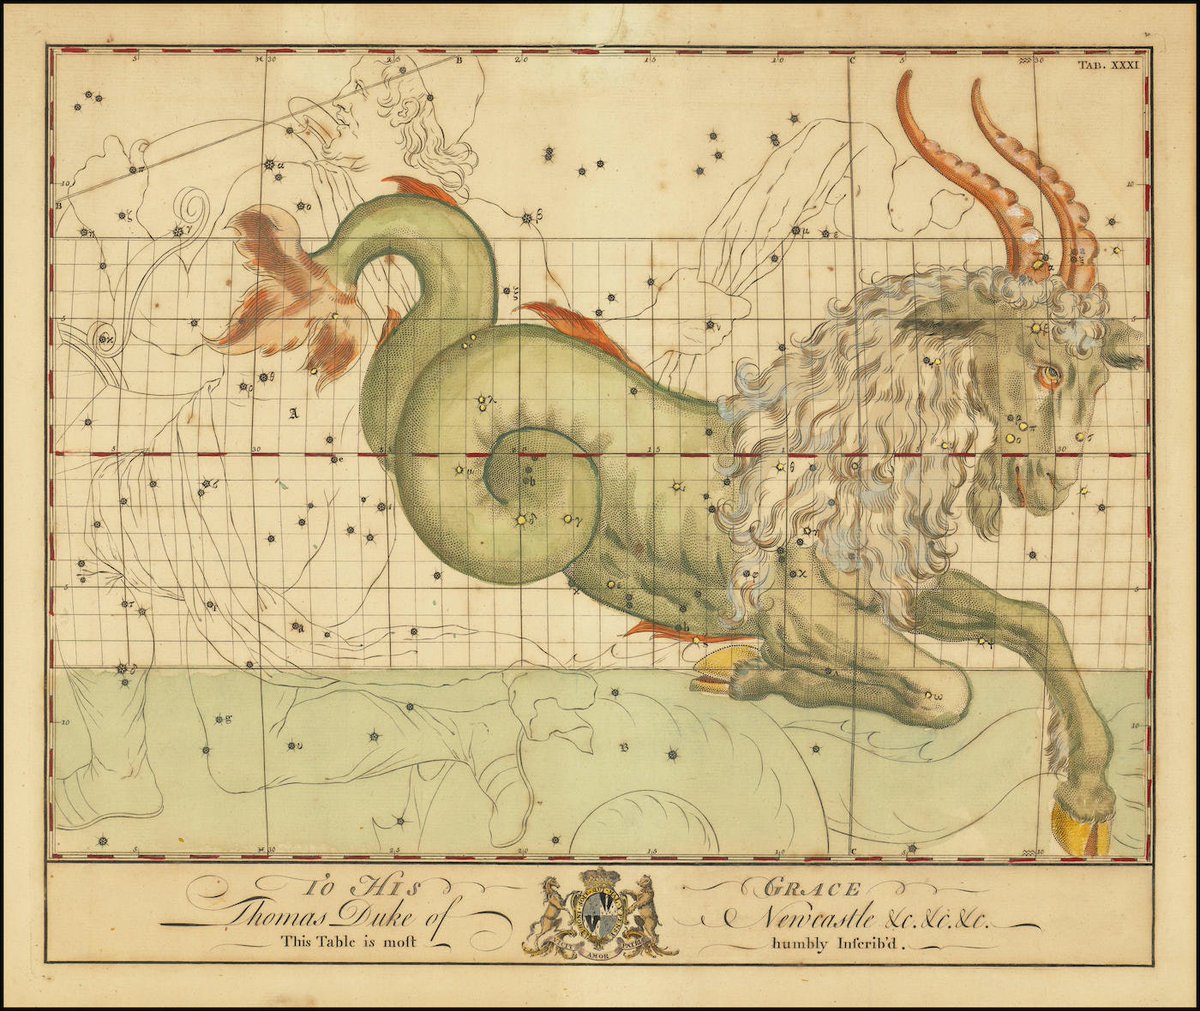 Capricorn. From John Bevis' Uranographia Britannica (ca. 1749), a watershed in the history of celestial atlases, being among the last to show allegiance to the old animated mythology of the heavens. More in our latest post: publicdomainreview.org/collection/bev…